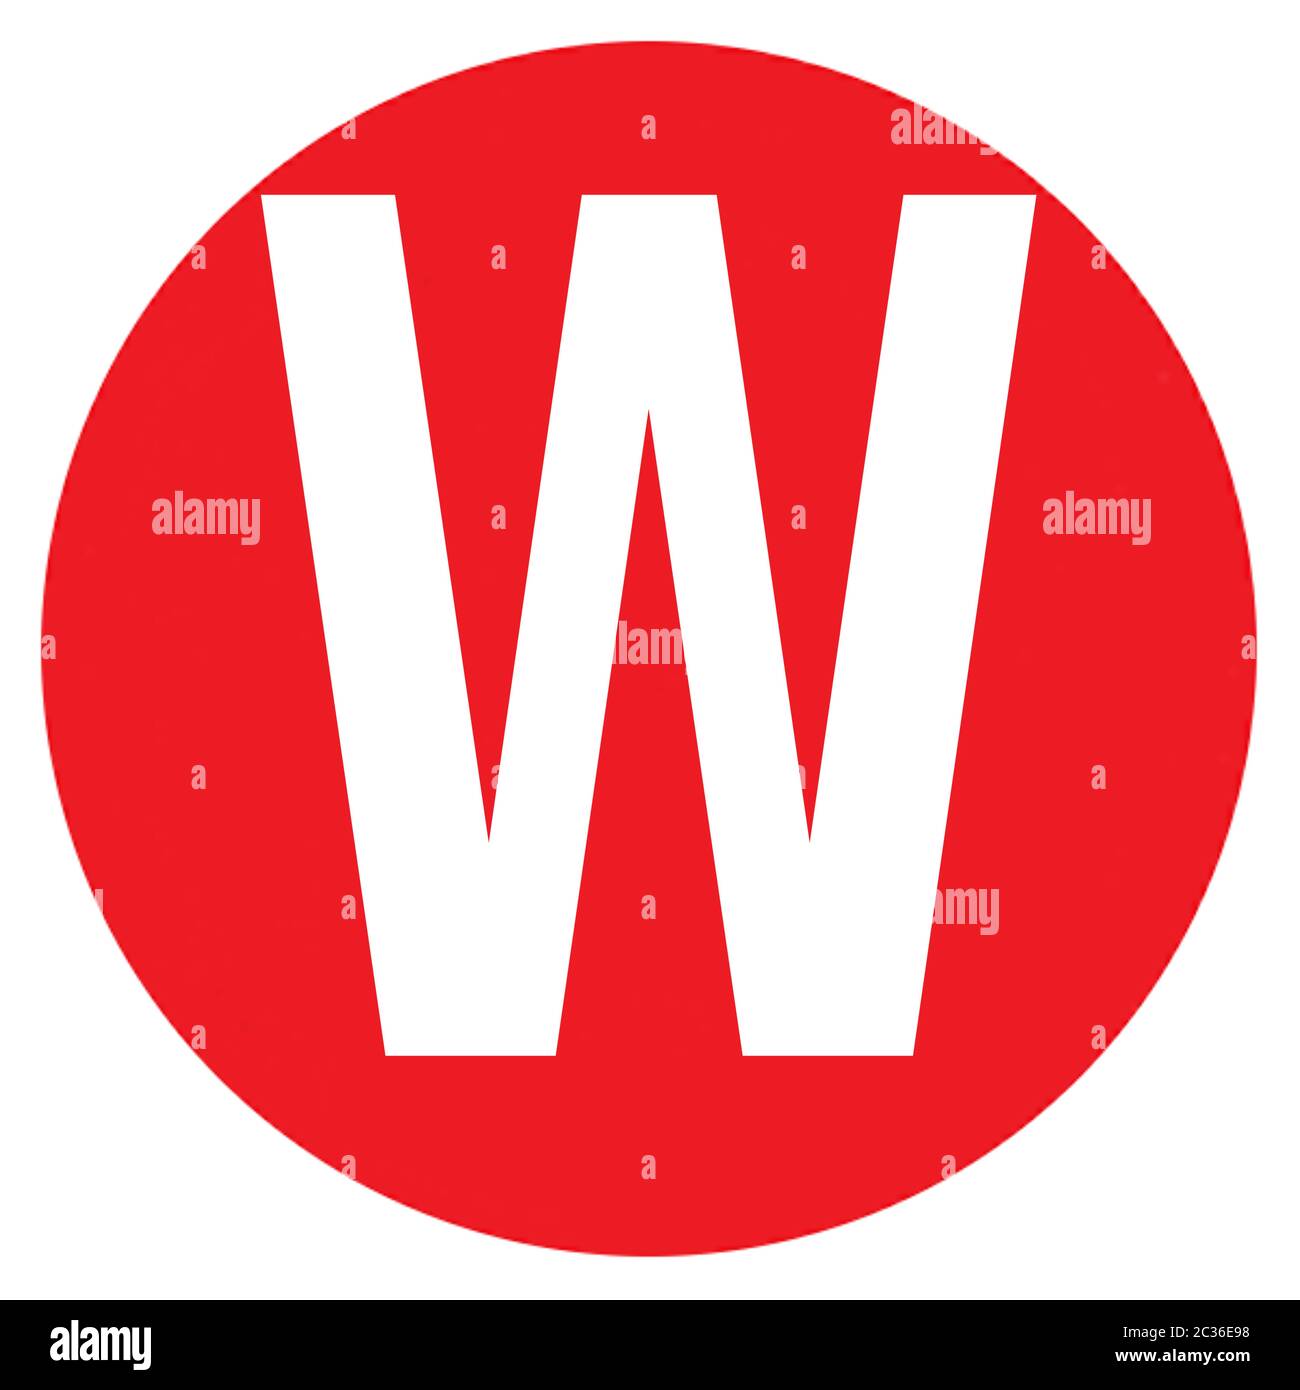 The Letter W Big Red Dot Letters And Numbers White Capitalized Font On A Big Red Dot Round Circular Background Up To 6000 x 6000 Pixels Stock Photo